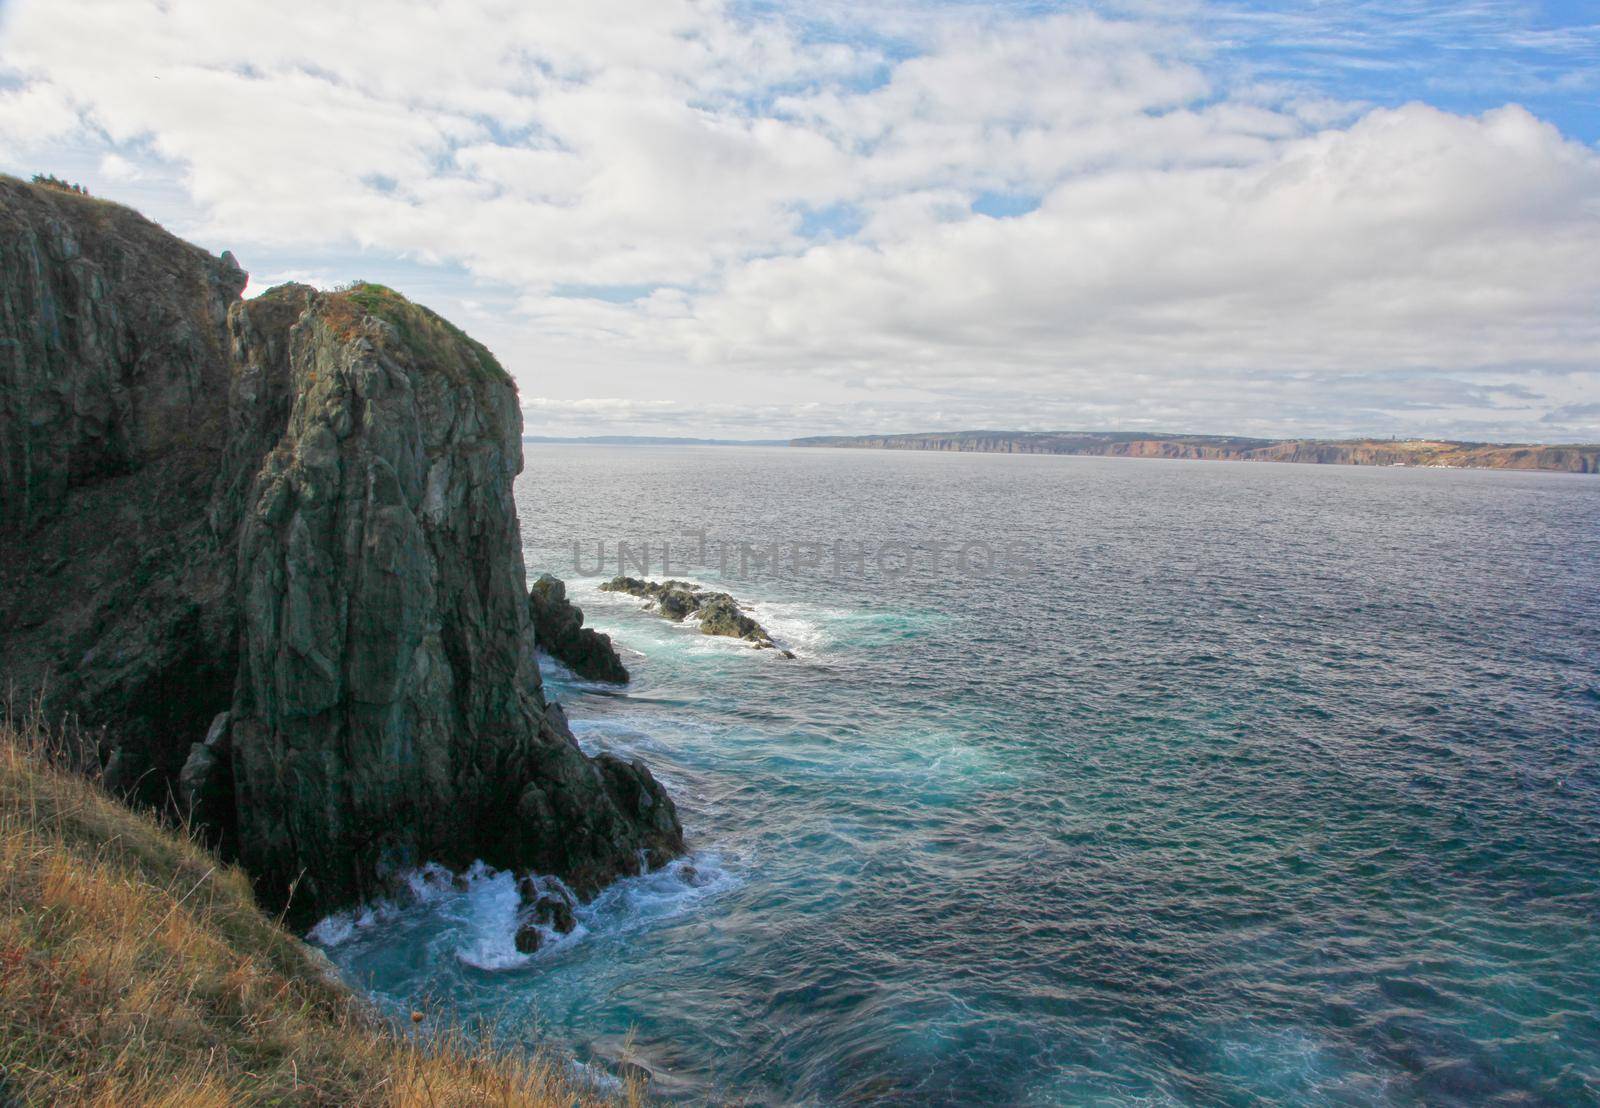 blue green waves crash against a cliffside on the east coast of canada in newfoundland